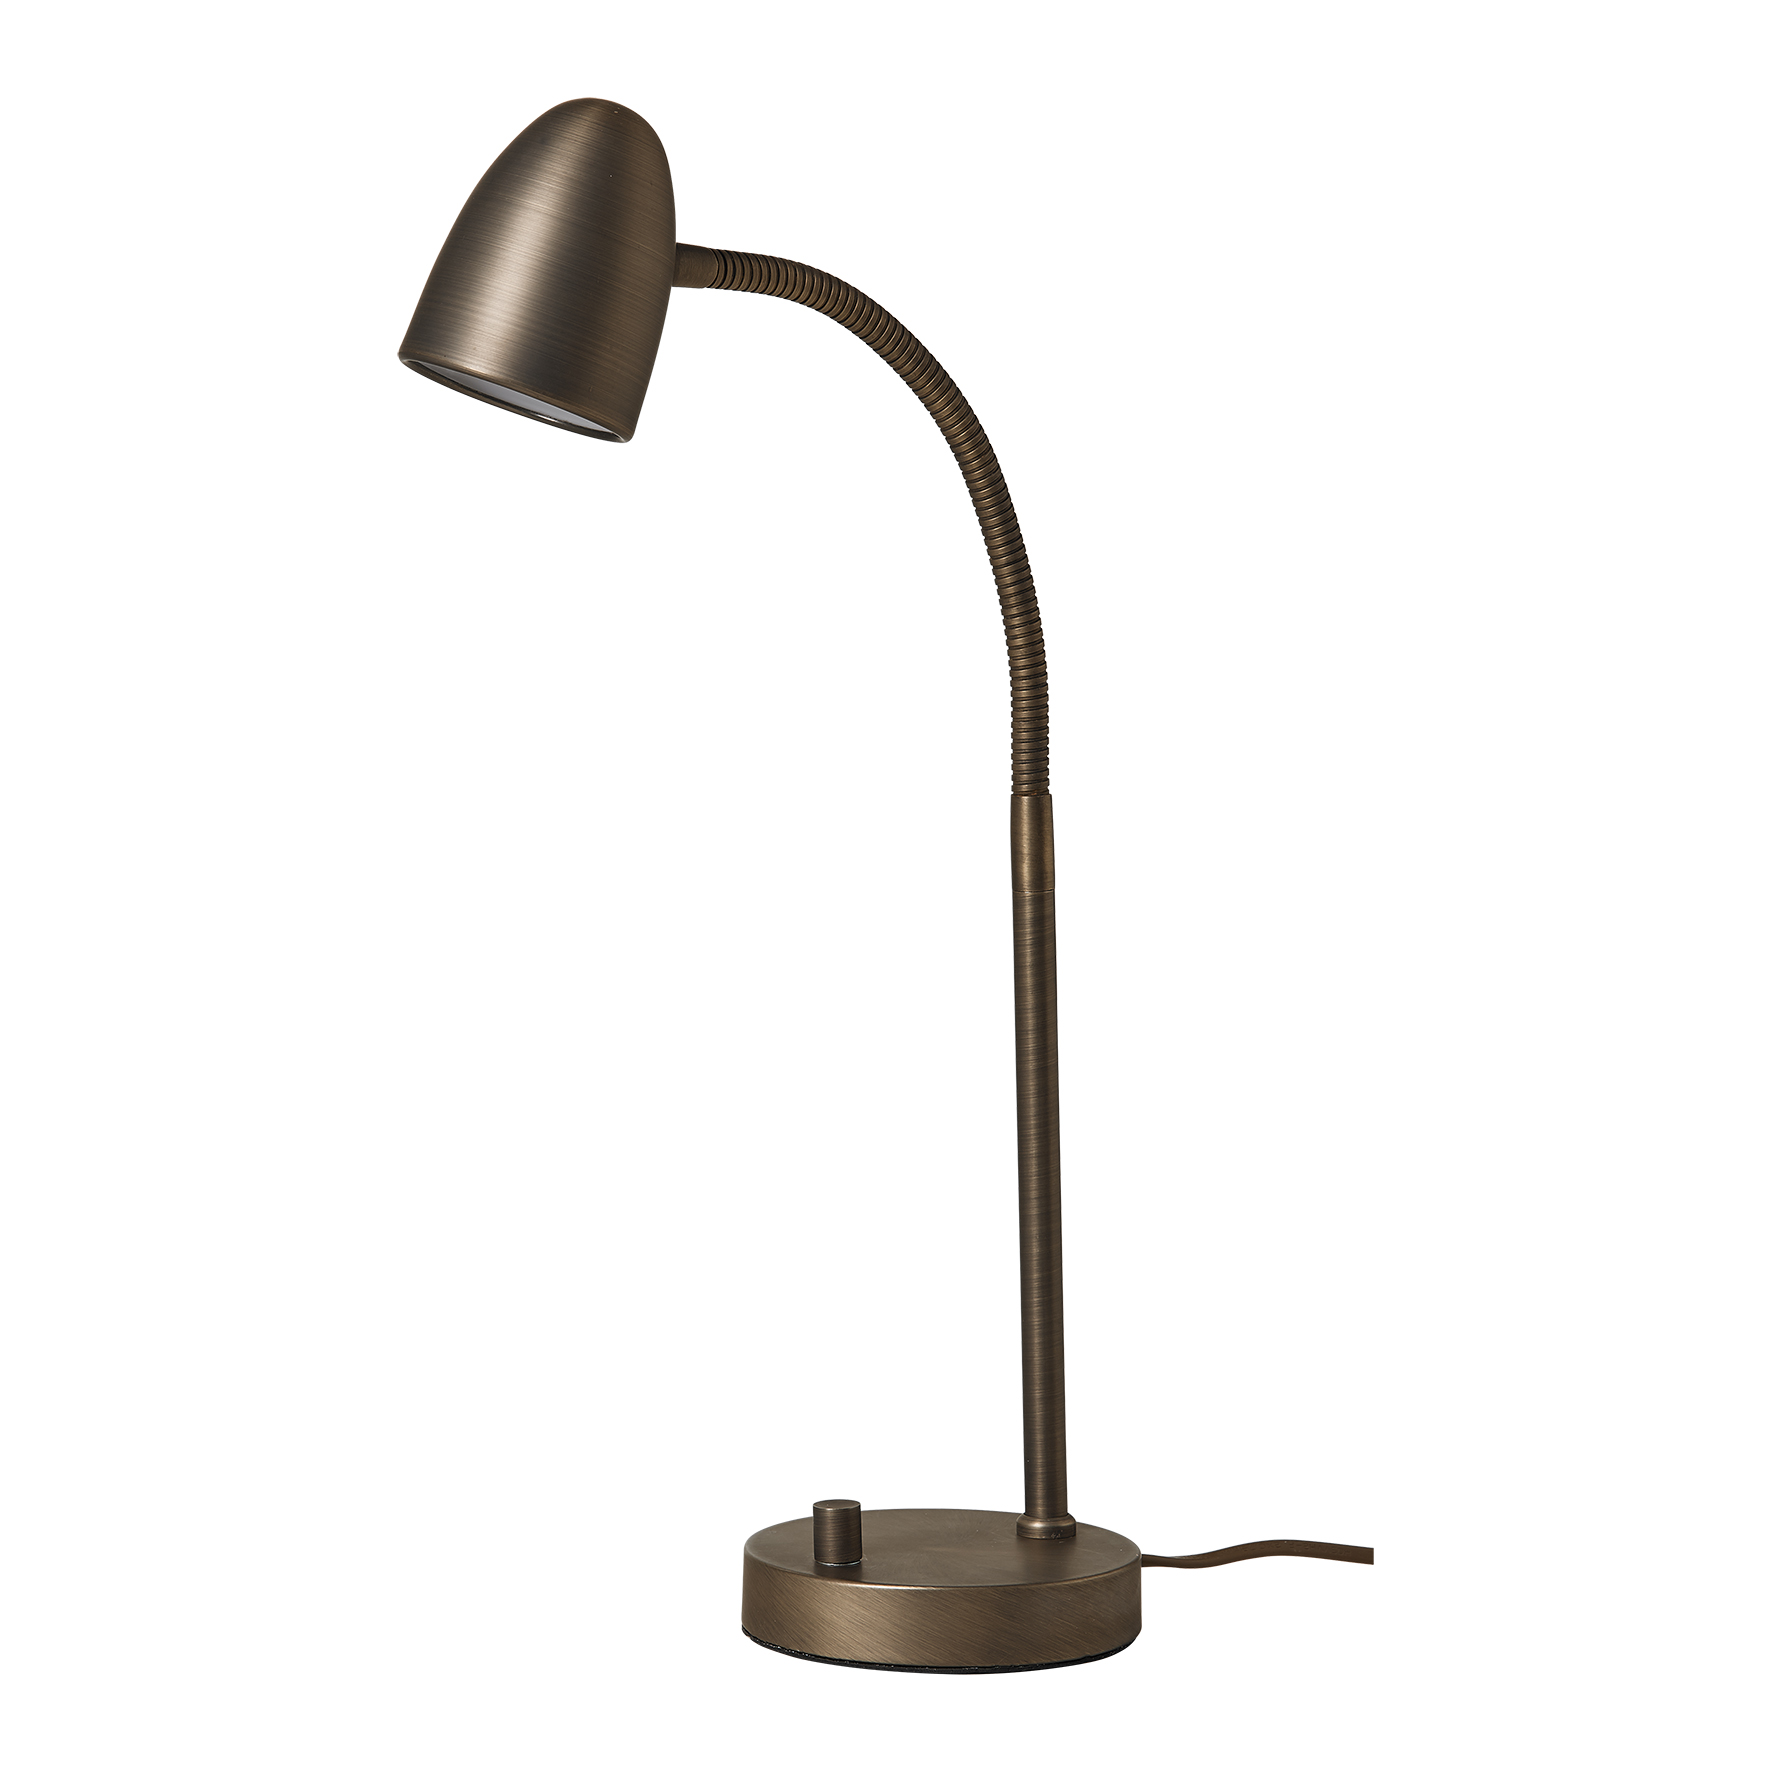 AH Belysning Koster Table Lamp Oxide